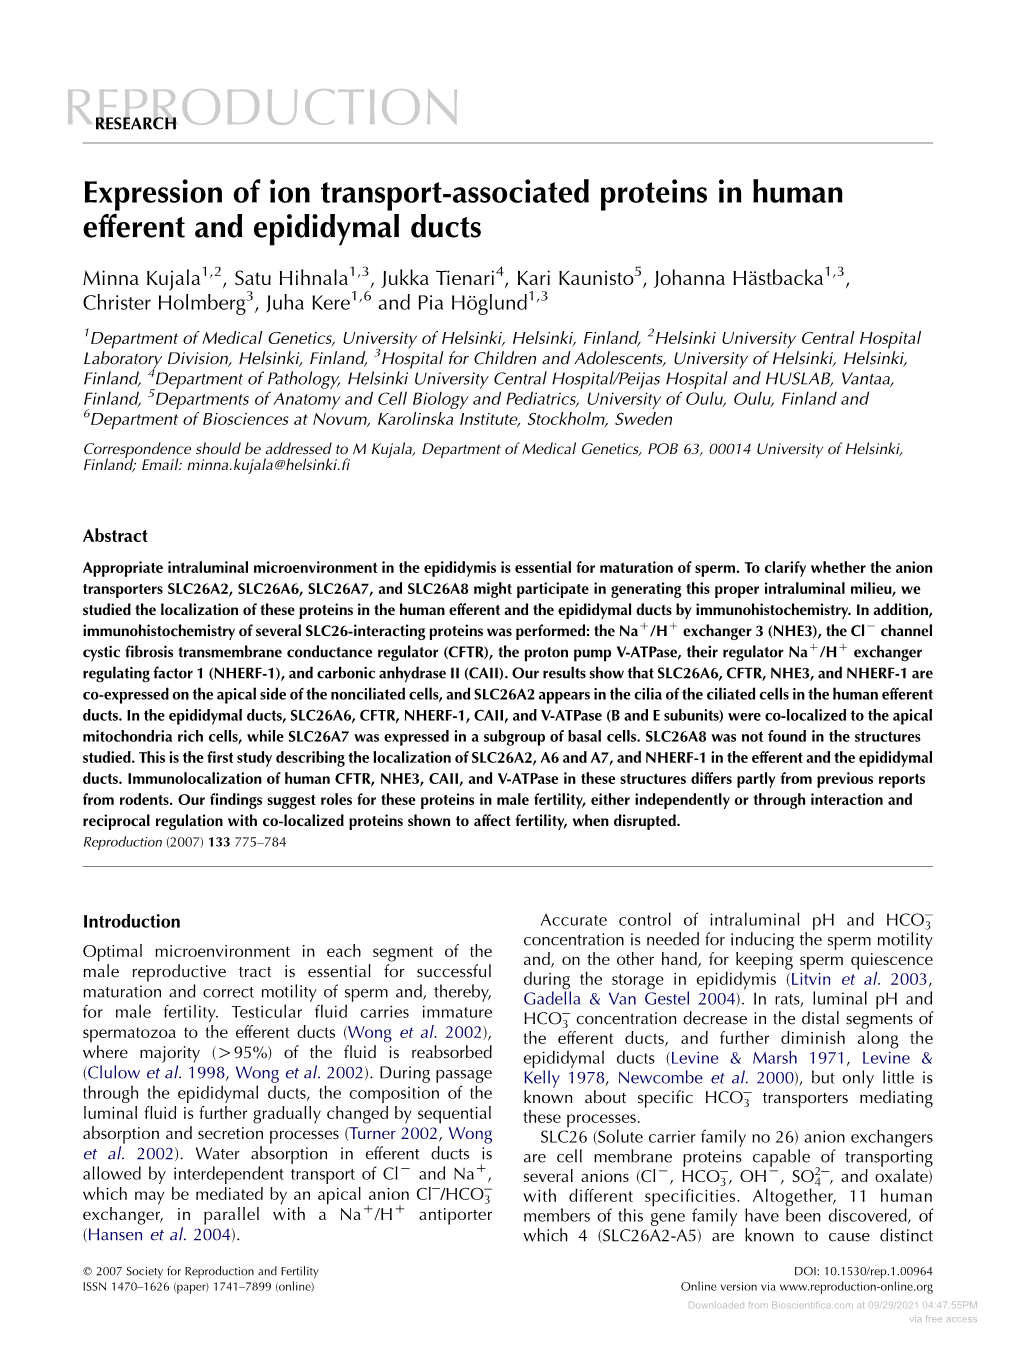 Expression of Ion Transport-Associated Proteins in Human Efferent and Epididymal Ducts